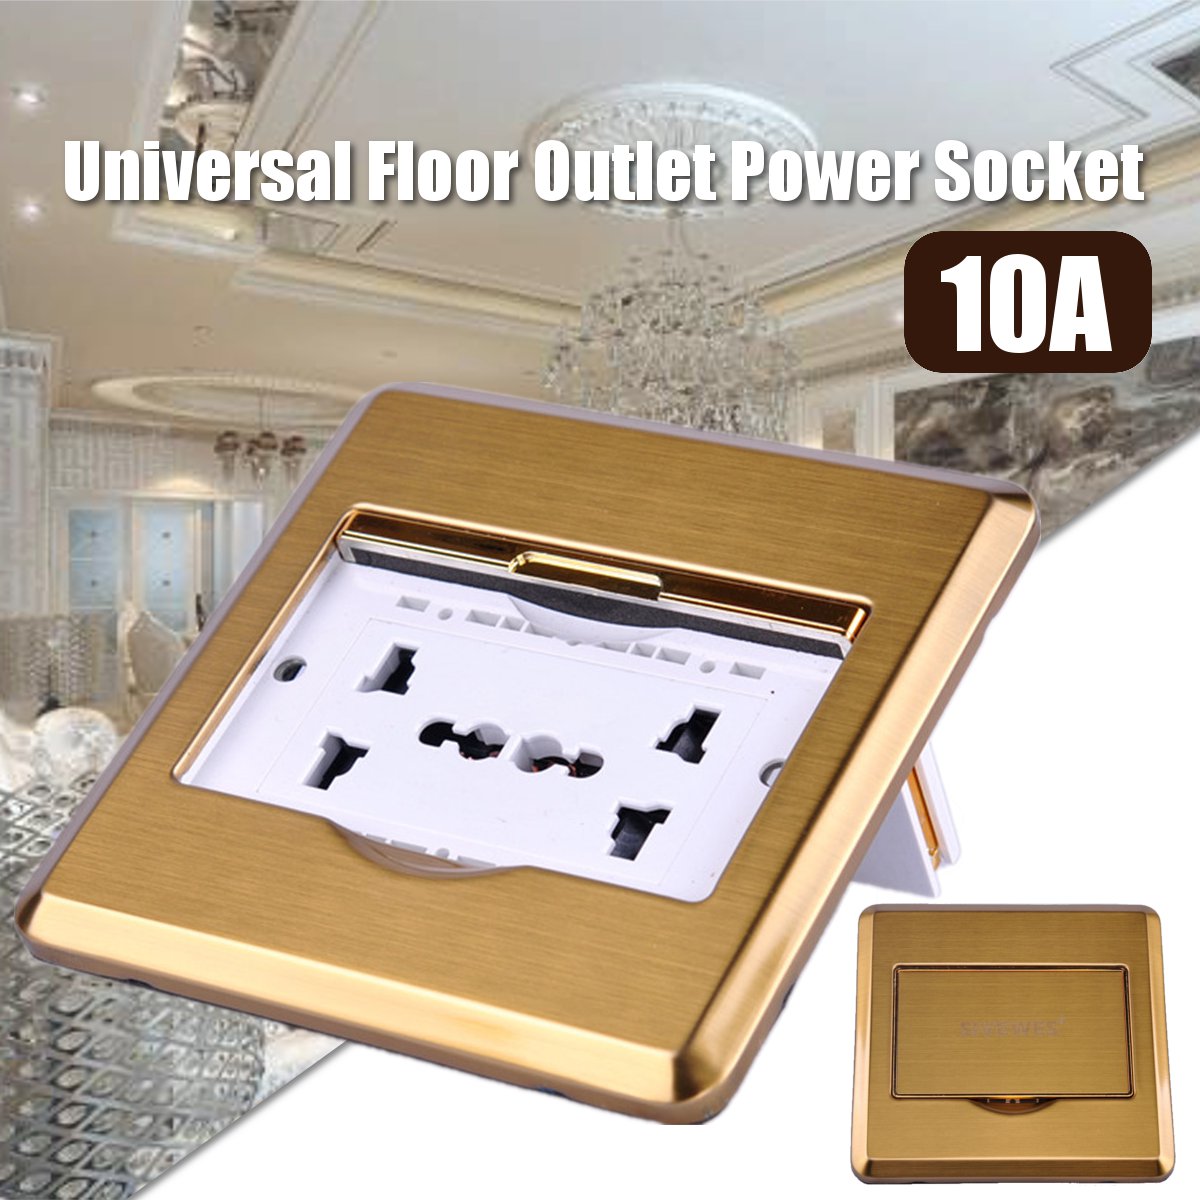 10A-Floor-Wall-Plate-Ground-Power-Outlet-Universal-Power-Socket-Charger-Receptacle-1510214-1